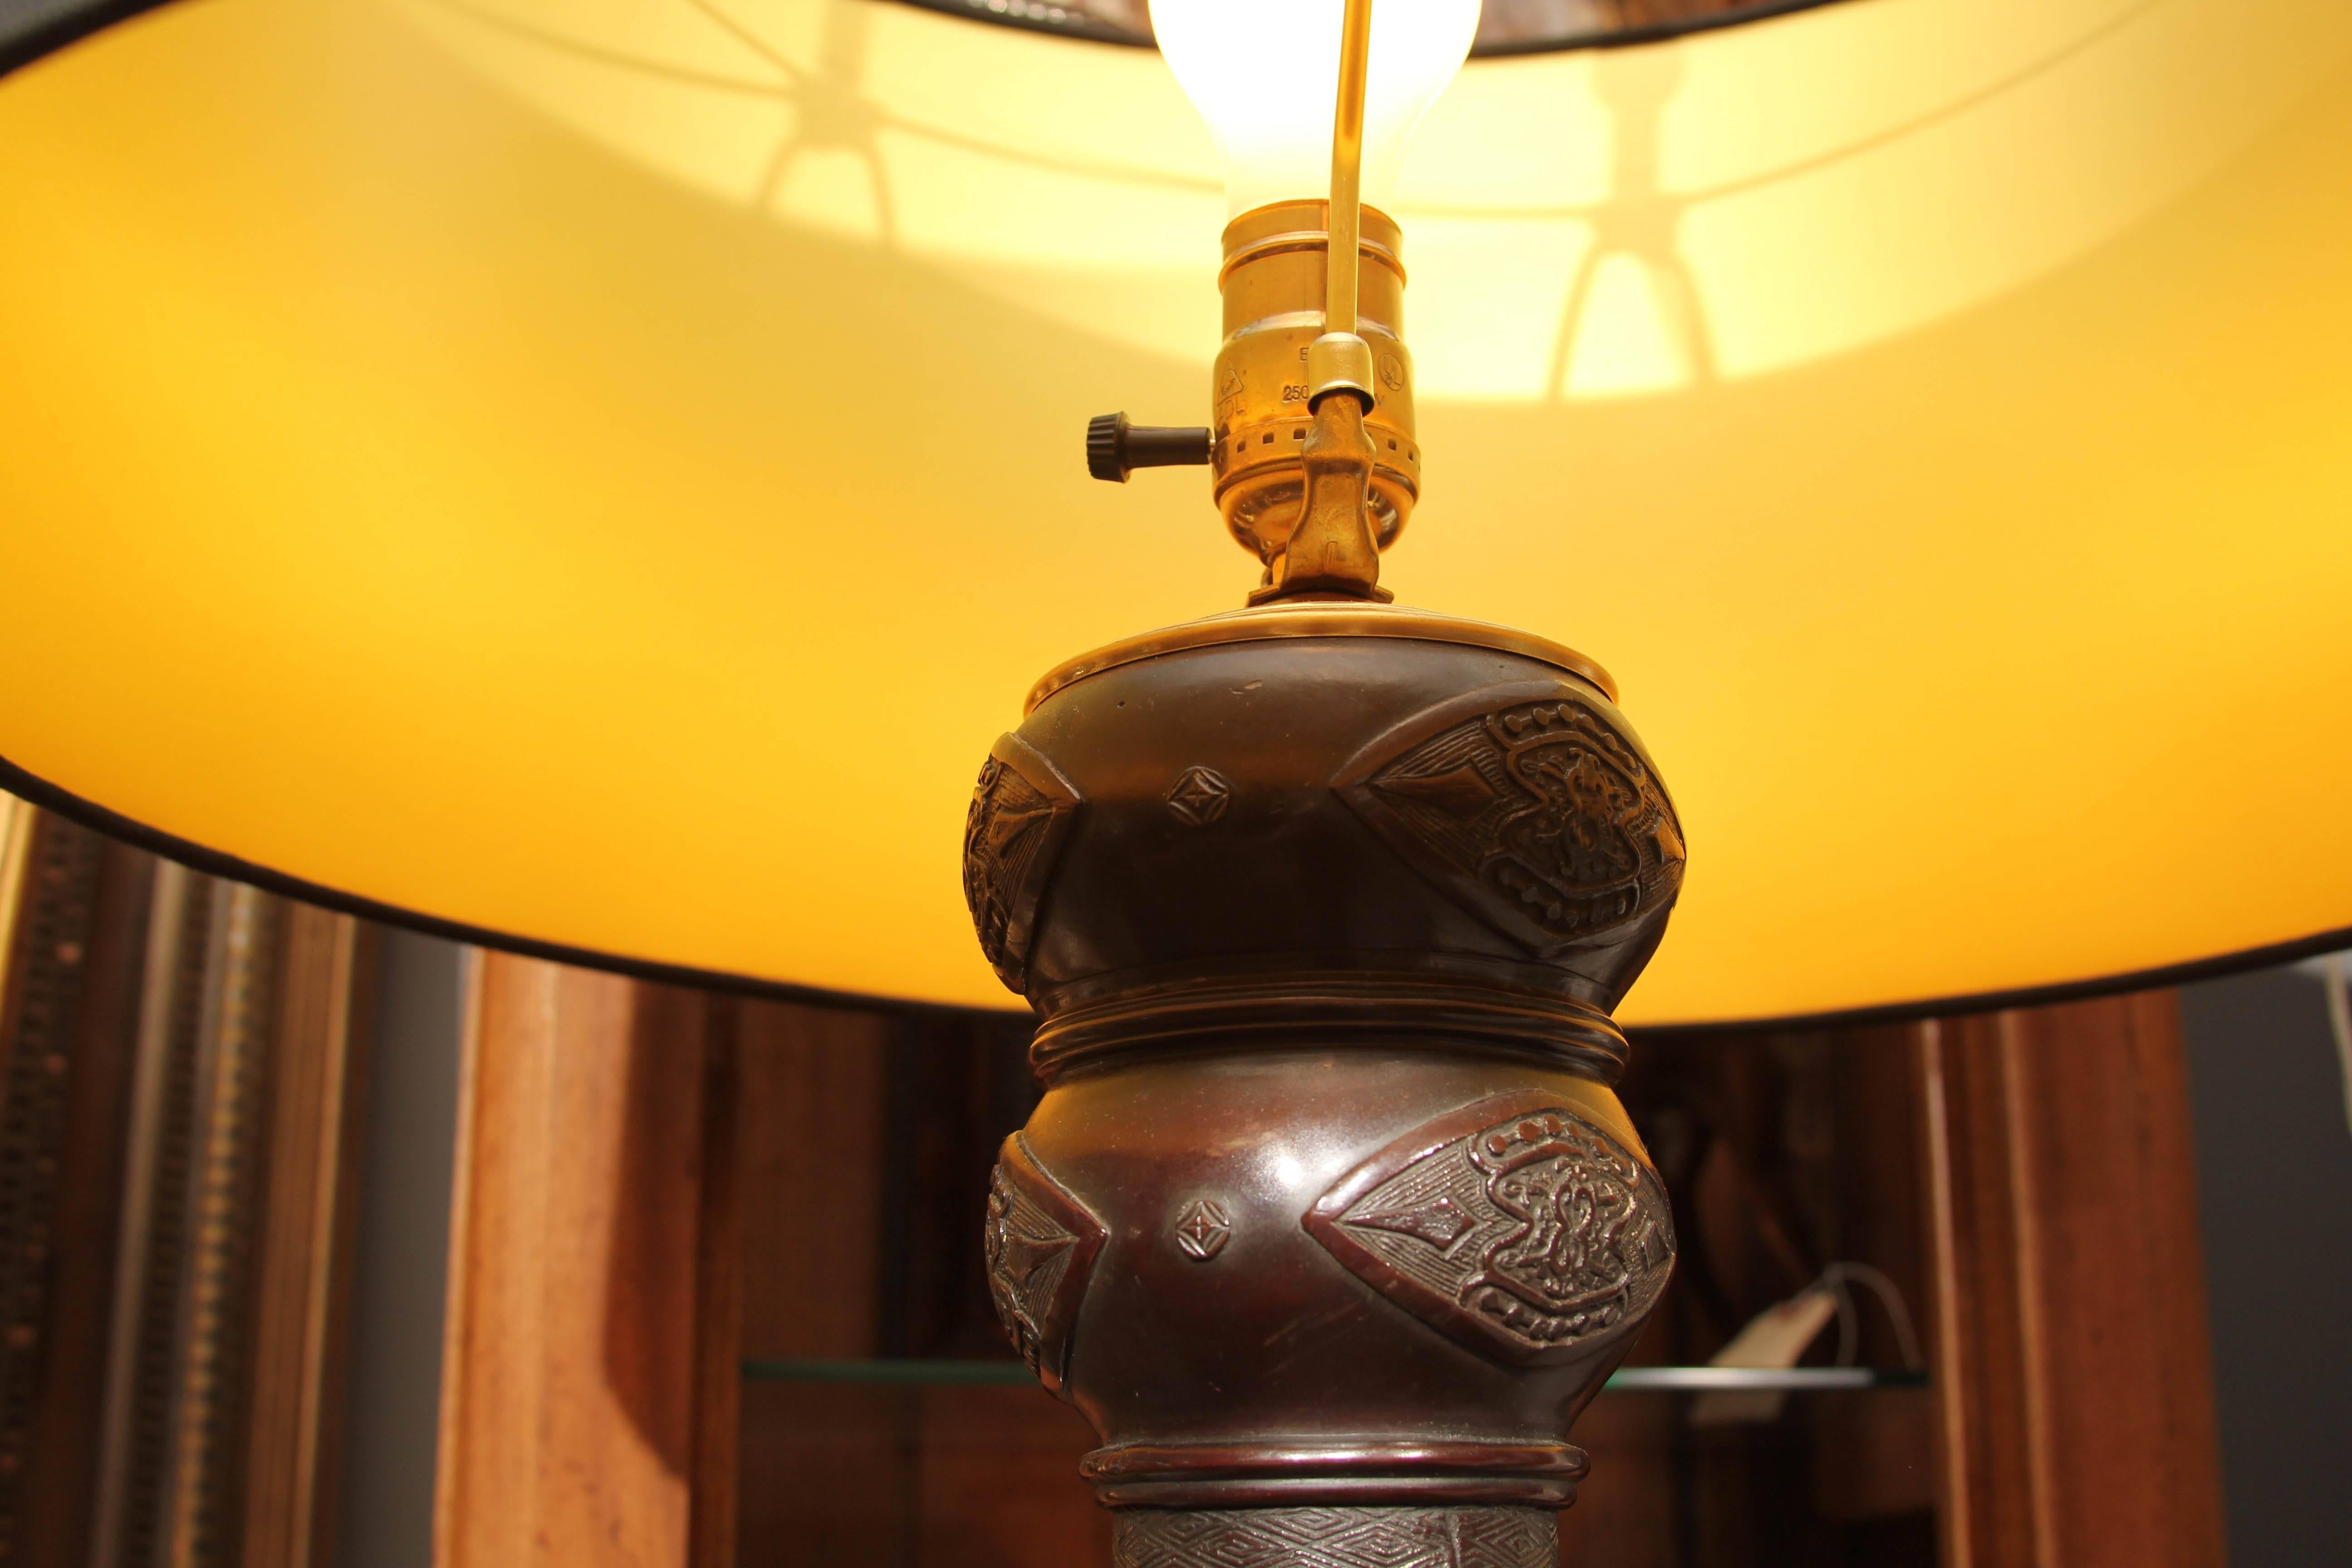 Japanese Bronze Lamp For Sale 5